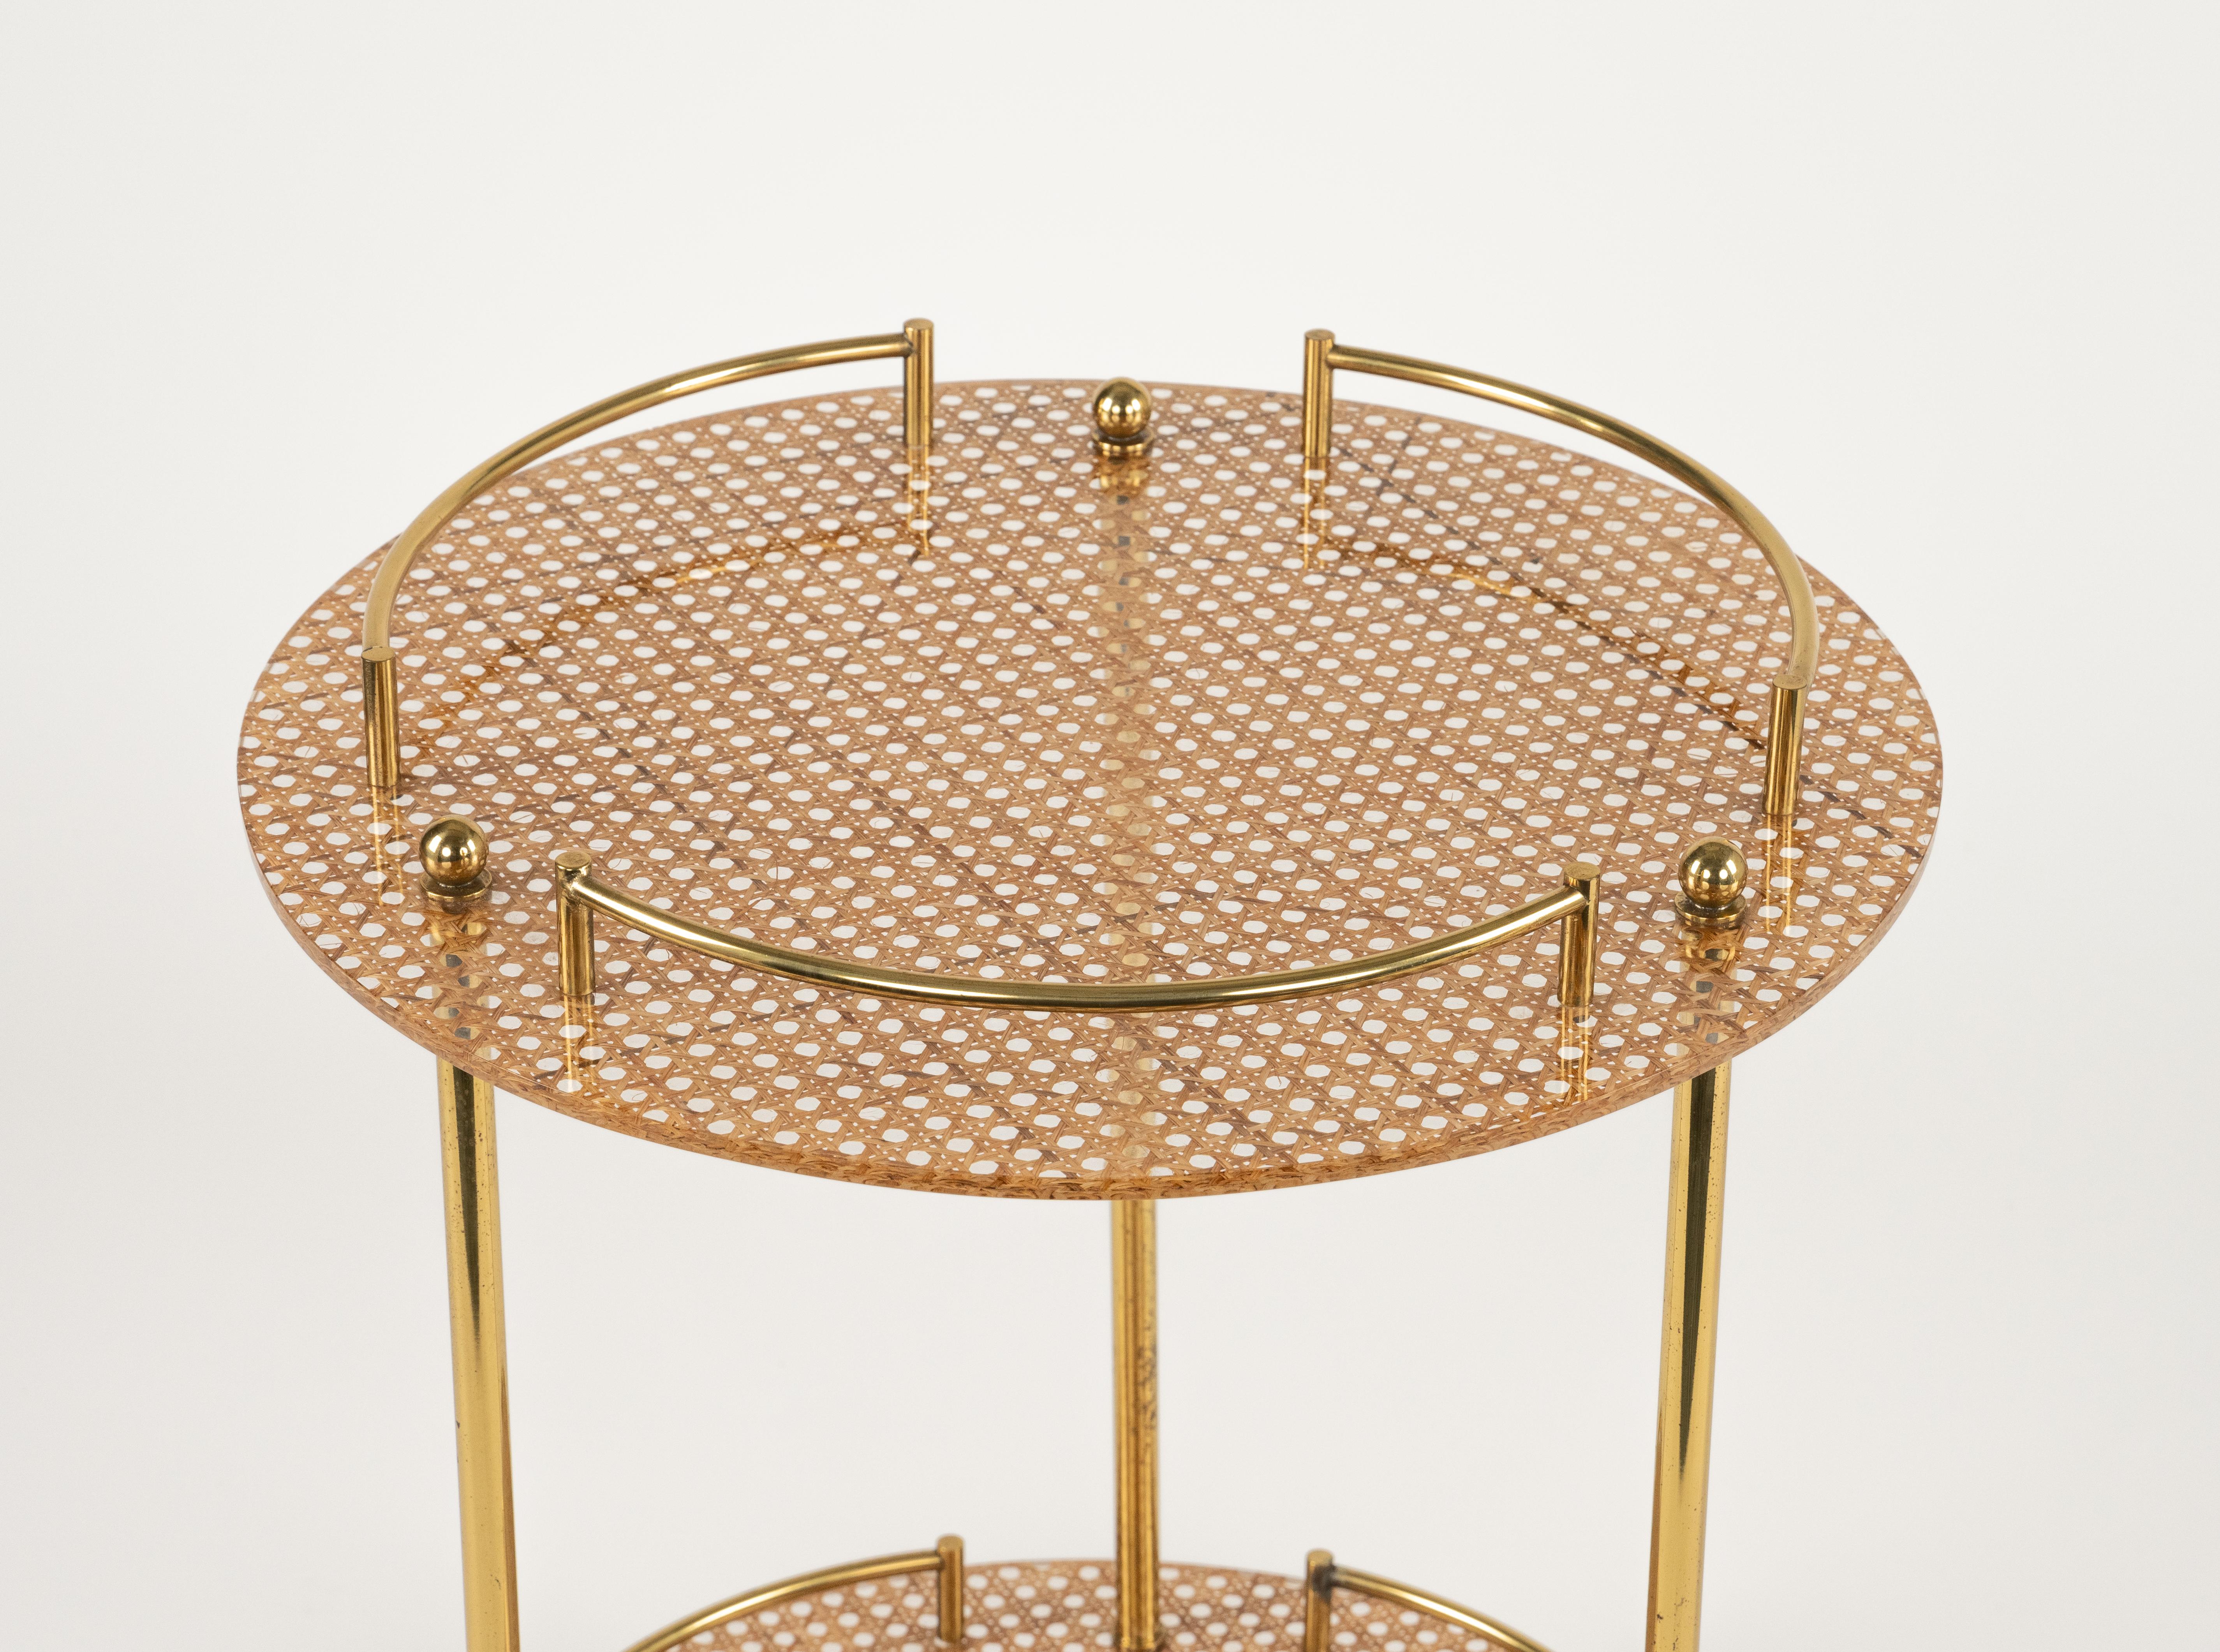 Serving Bar Cart in Lucite, Brass and Rattan Christian Dior Style, Italy 1970s For Sale 2